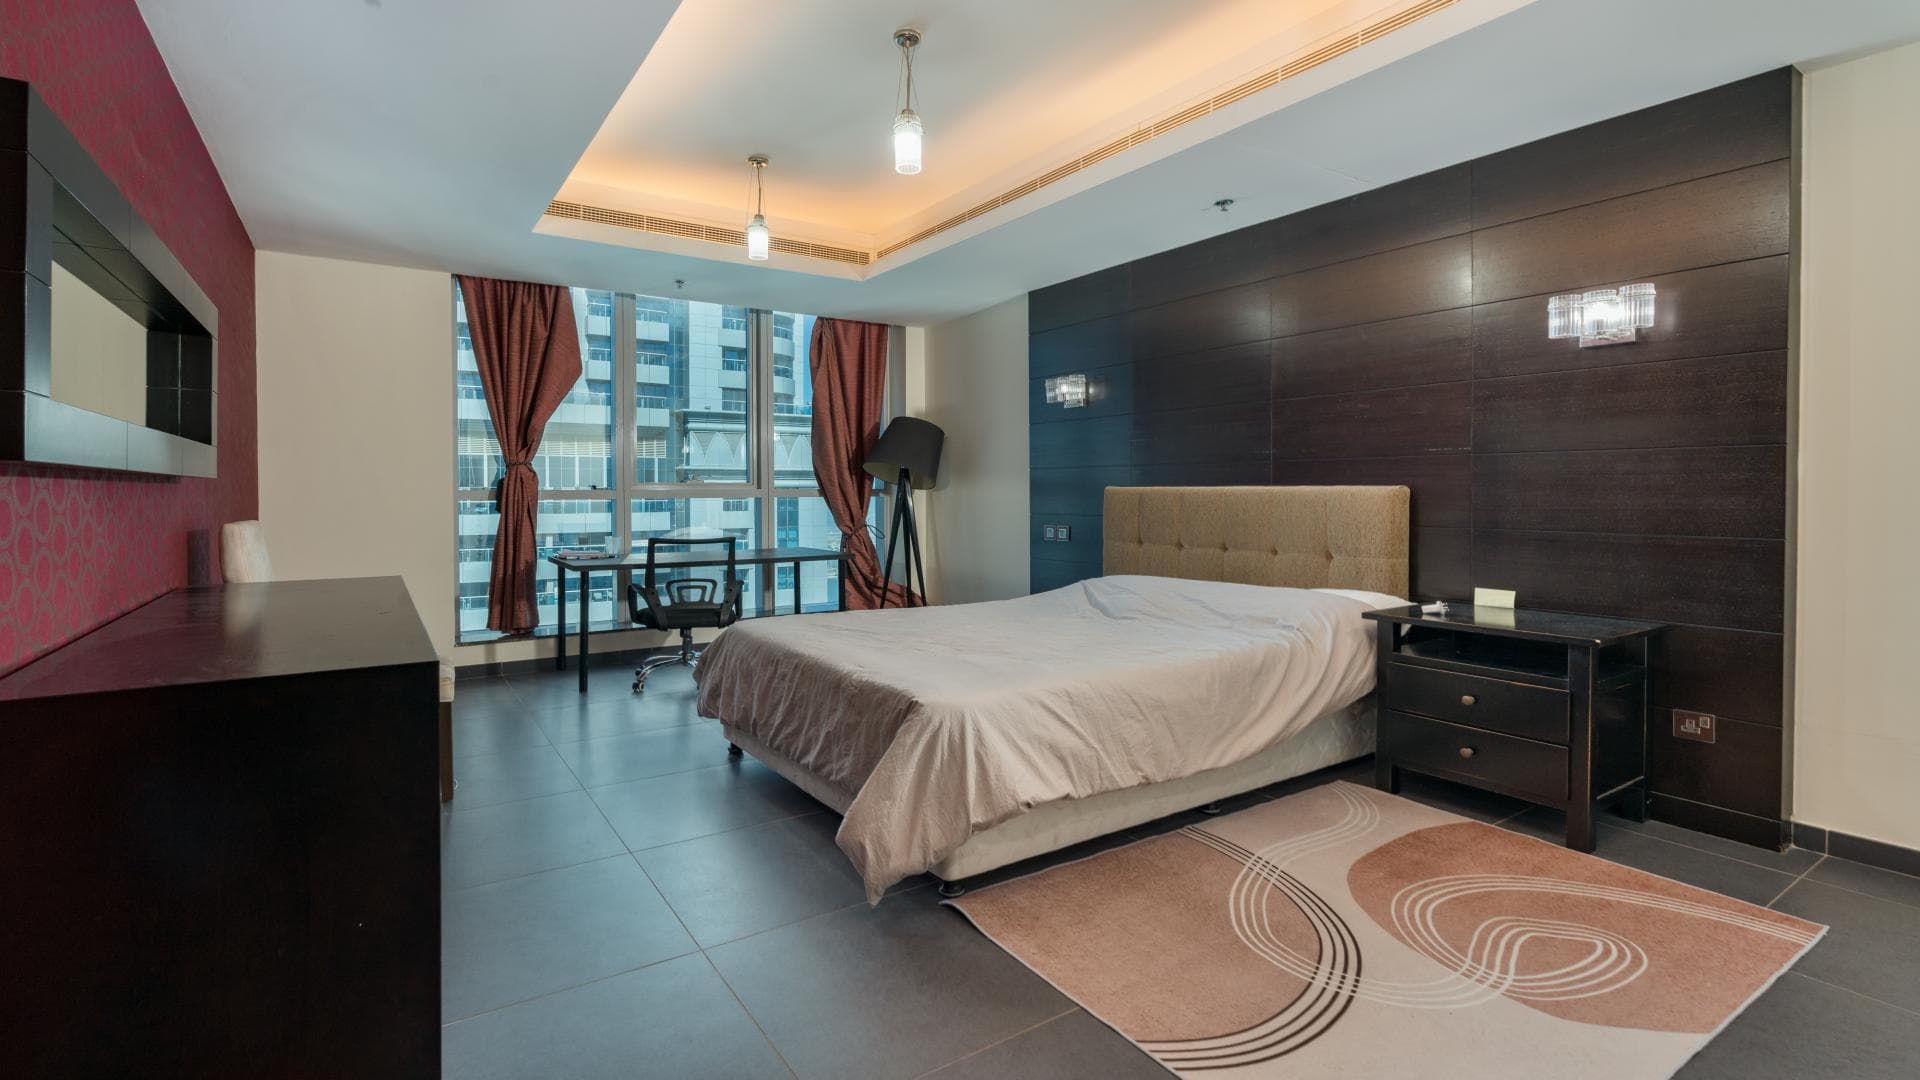 3 Bedroom Penthouse For Sale Torch Tower Lp37252 30003f1187a7ee00.jpg